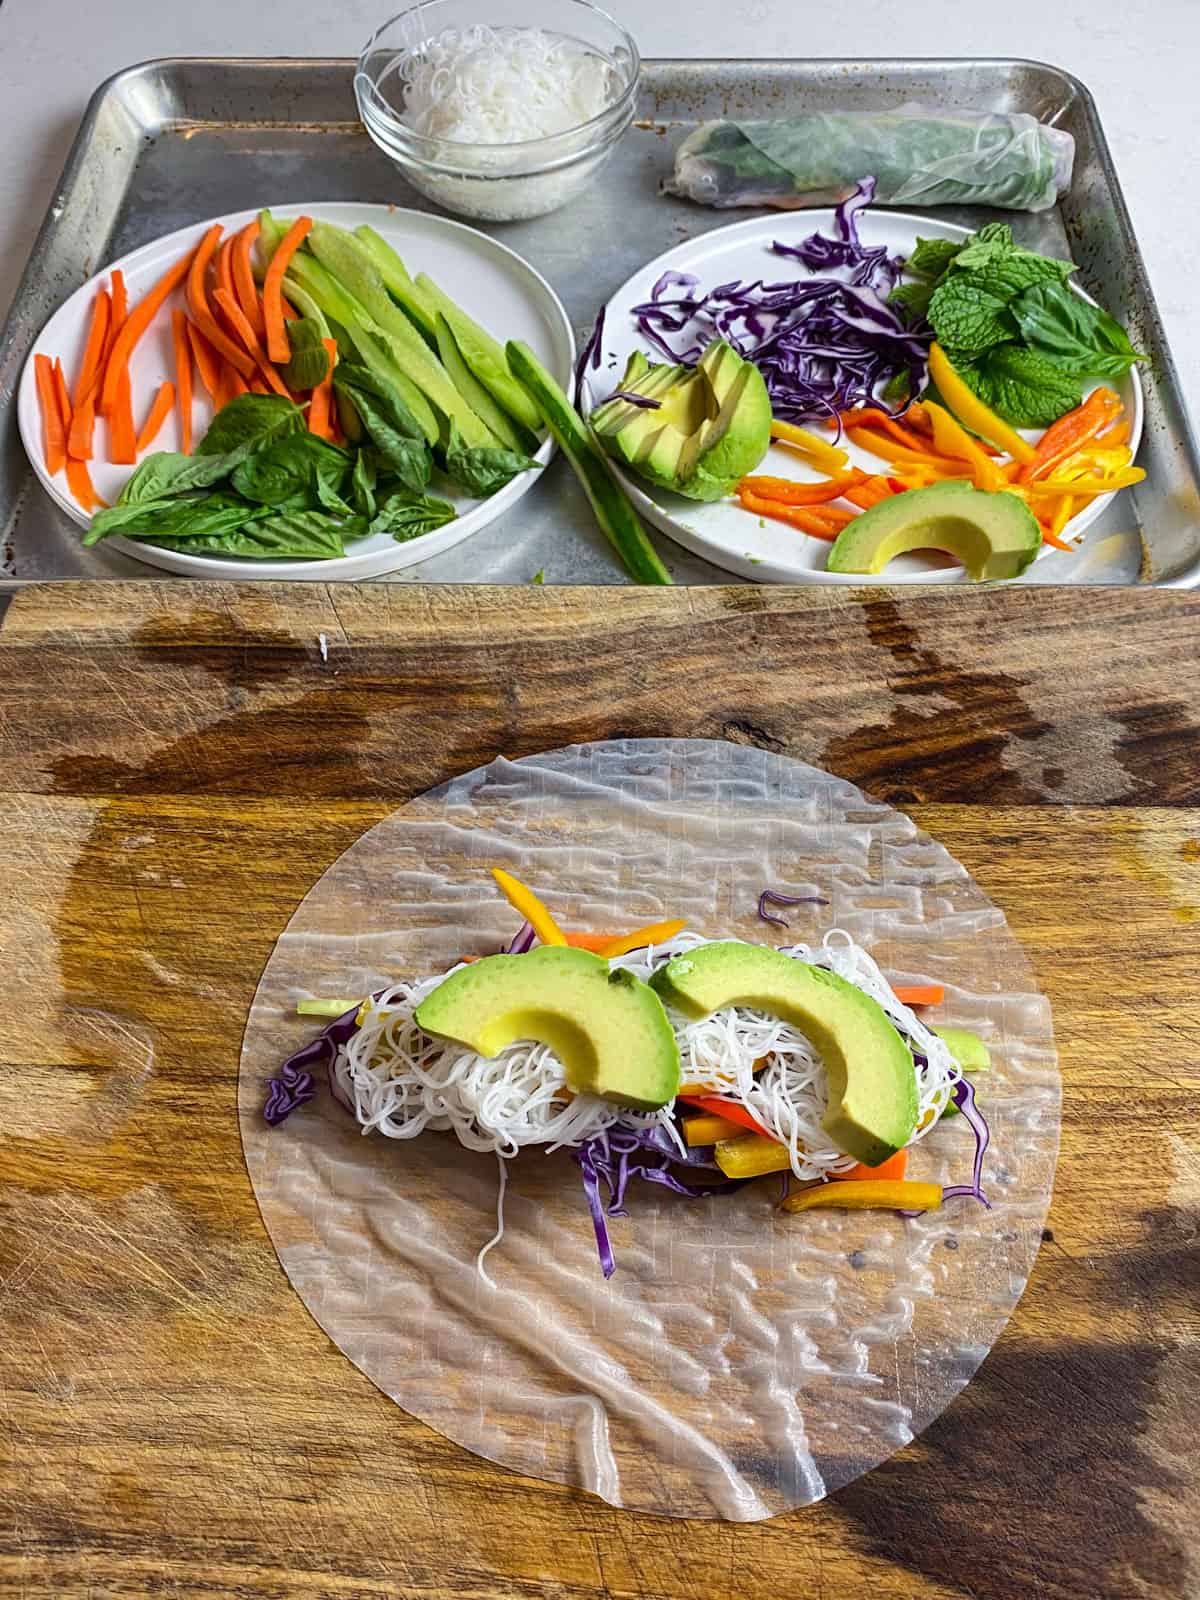 Layer the rice noodles and slices of avocado to the spring rolls.